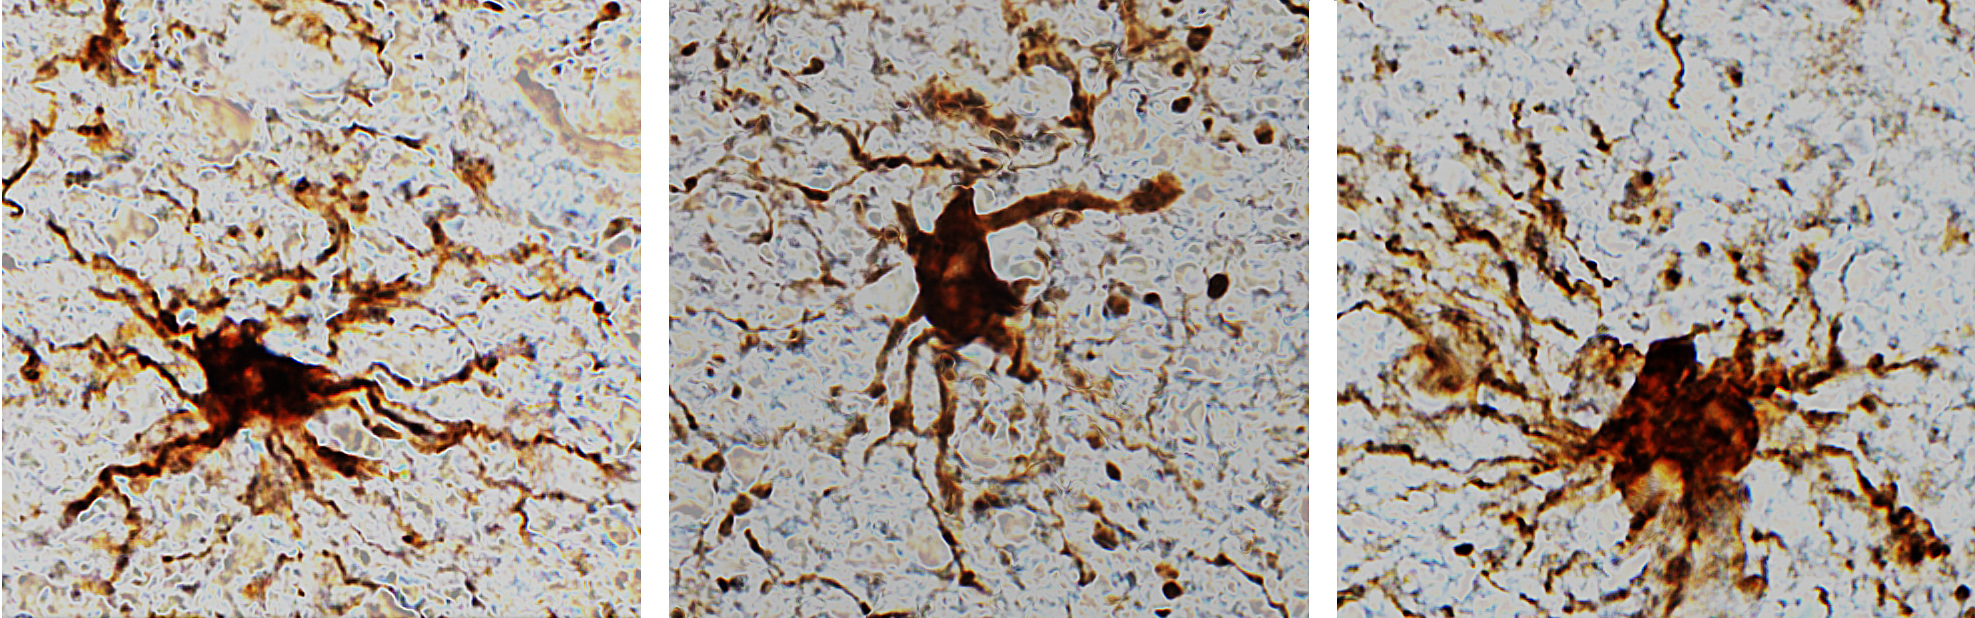 Zombie brain genes have been identified in donated brain tissues after studies.